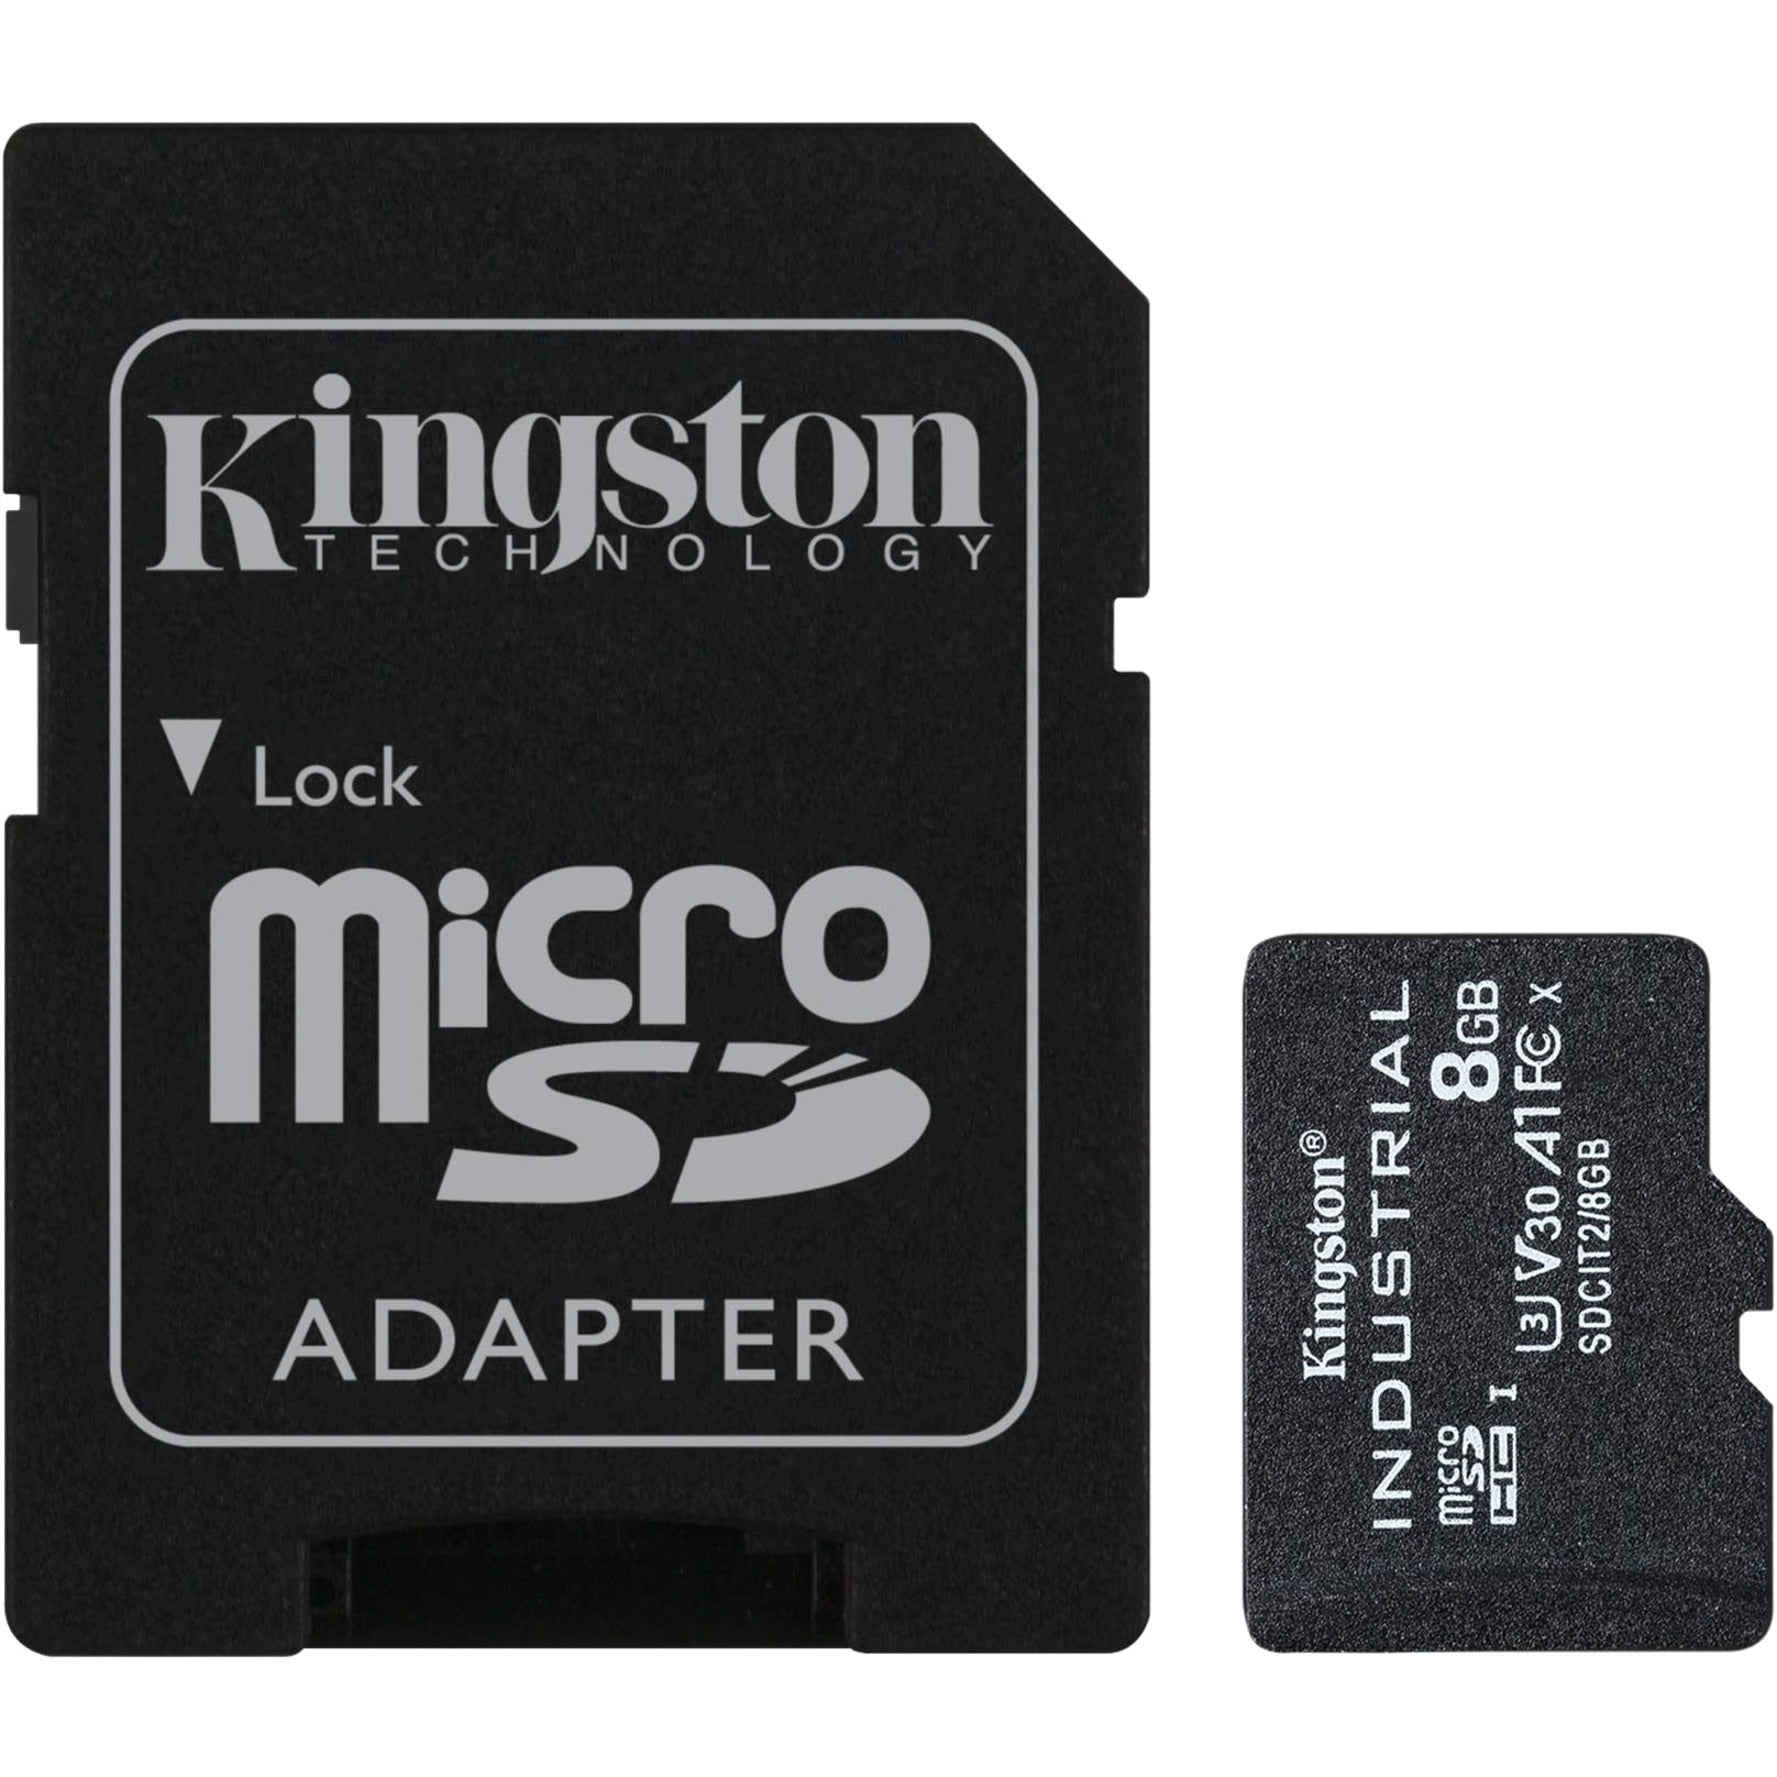 Kingston SDCIT2/8GB Industrial 8GB microSDHC Card, 100 MB/s Data Transfer Rate, V30 Video Speed Class